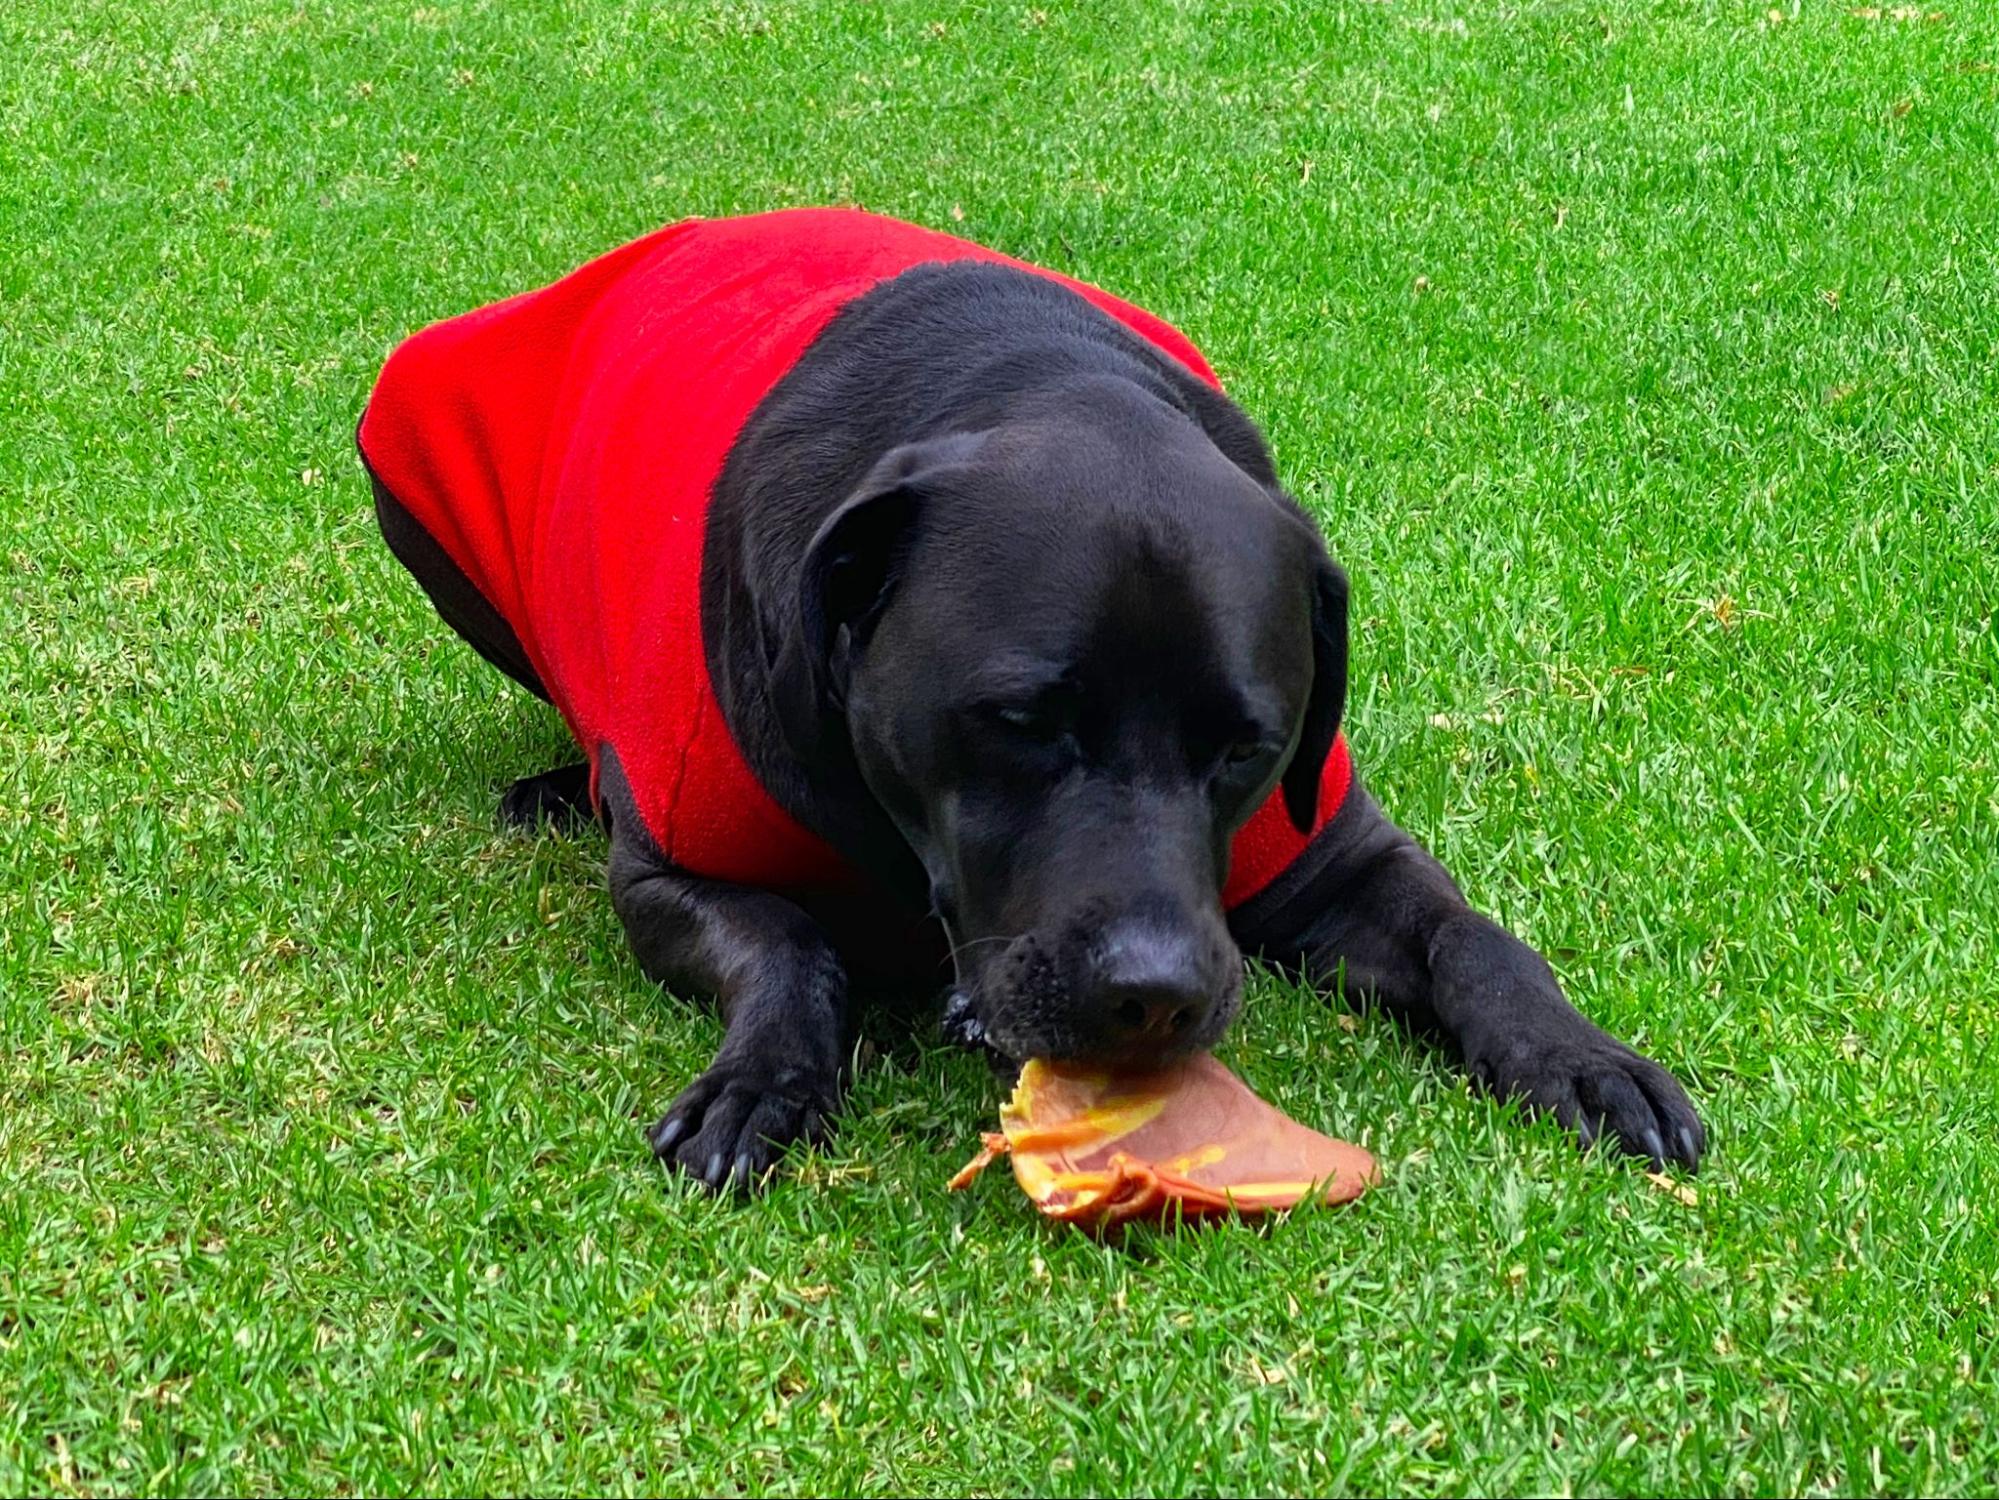 Pigs Ears for Dogs: Are They a Safe and Nutritious Treat Option?